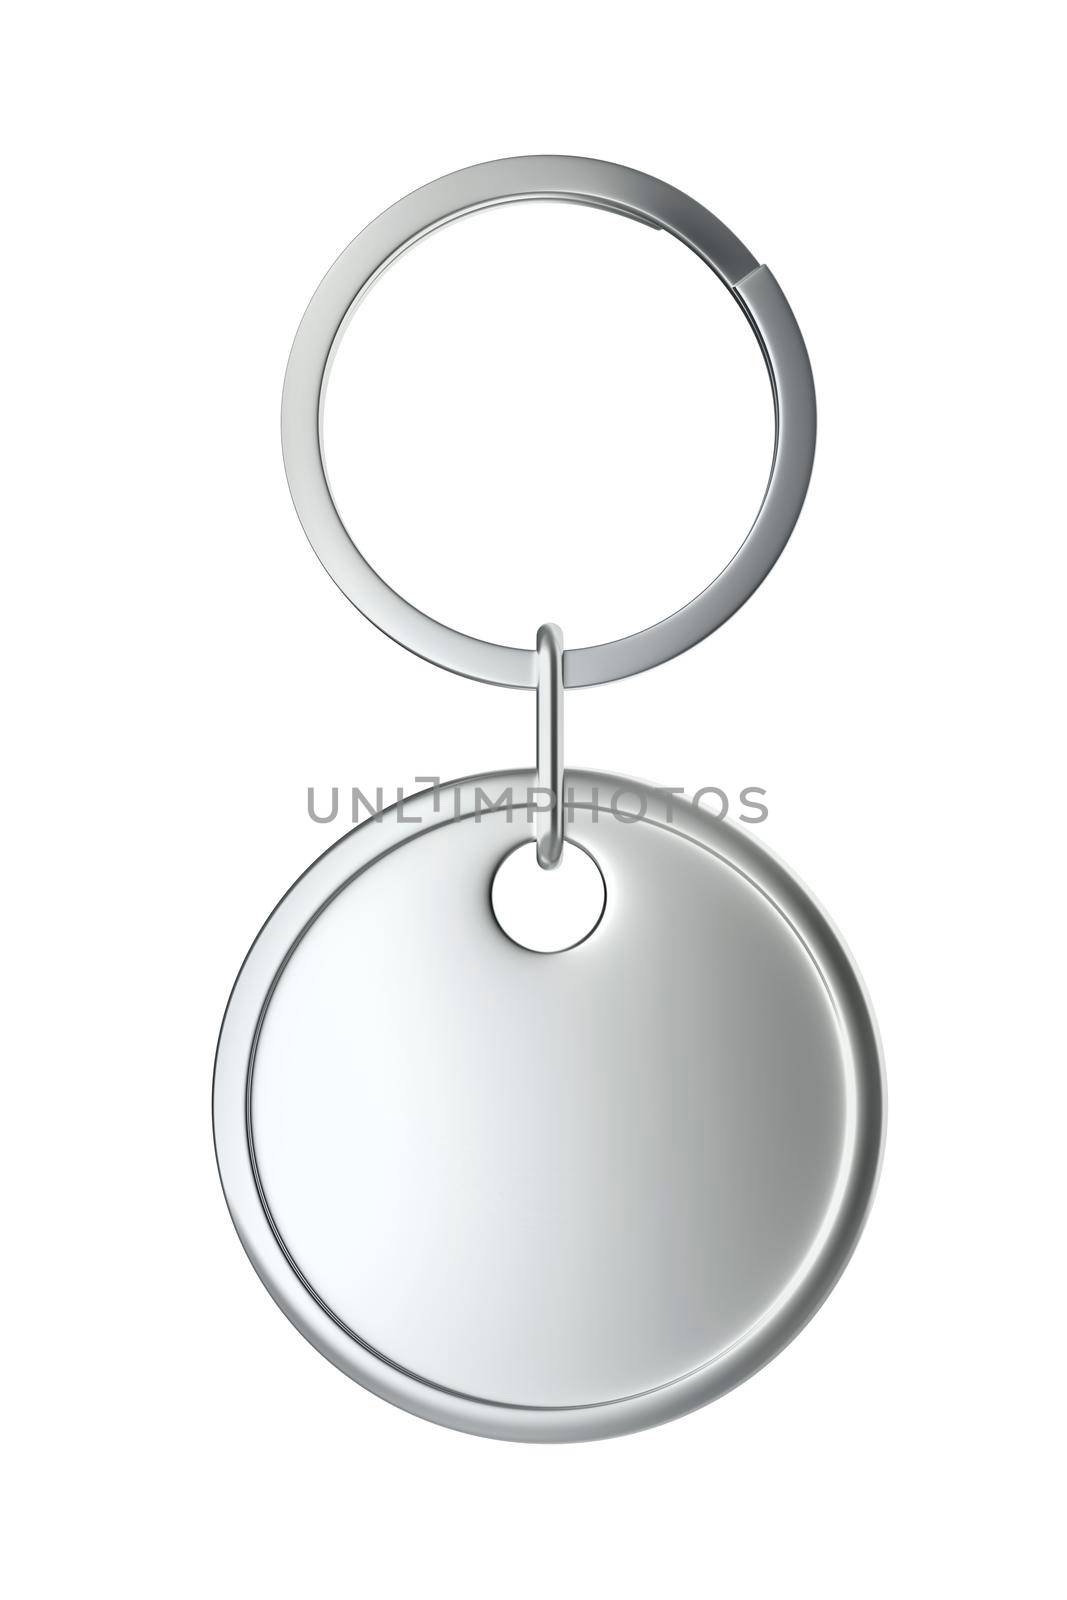 Round silver keychain by magraphics